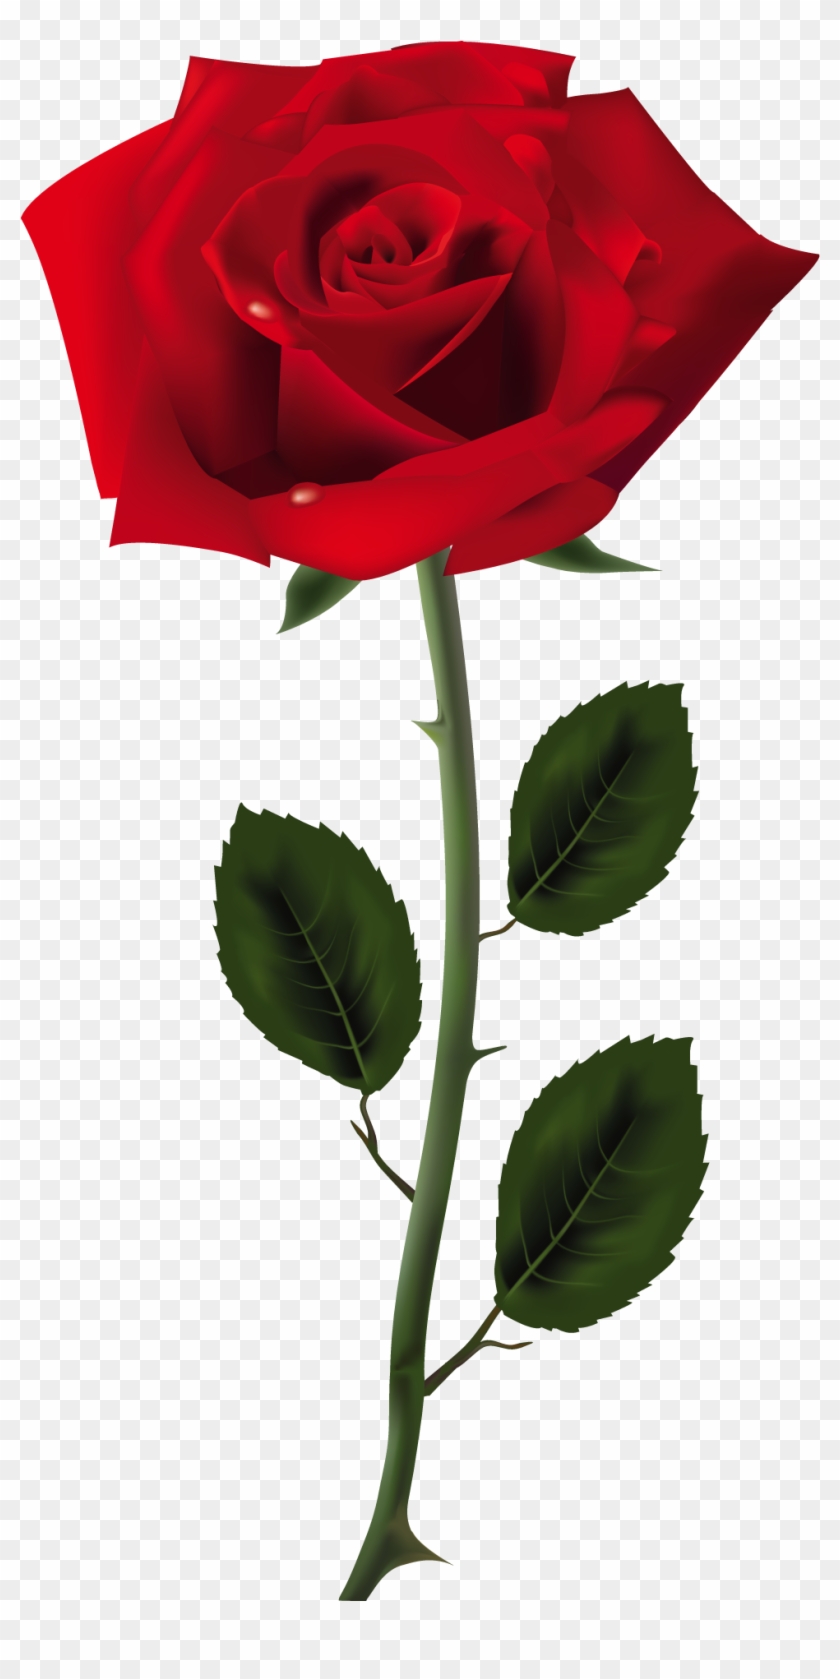 Red Rose Clipart Png Tumblr - Rose Png #827042